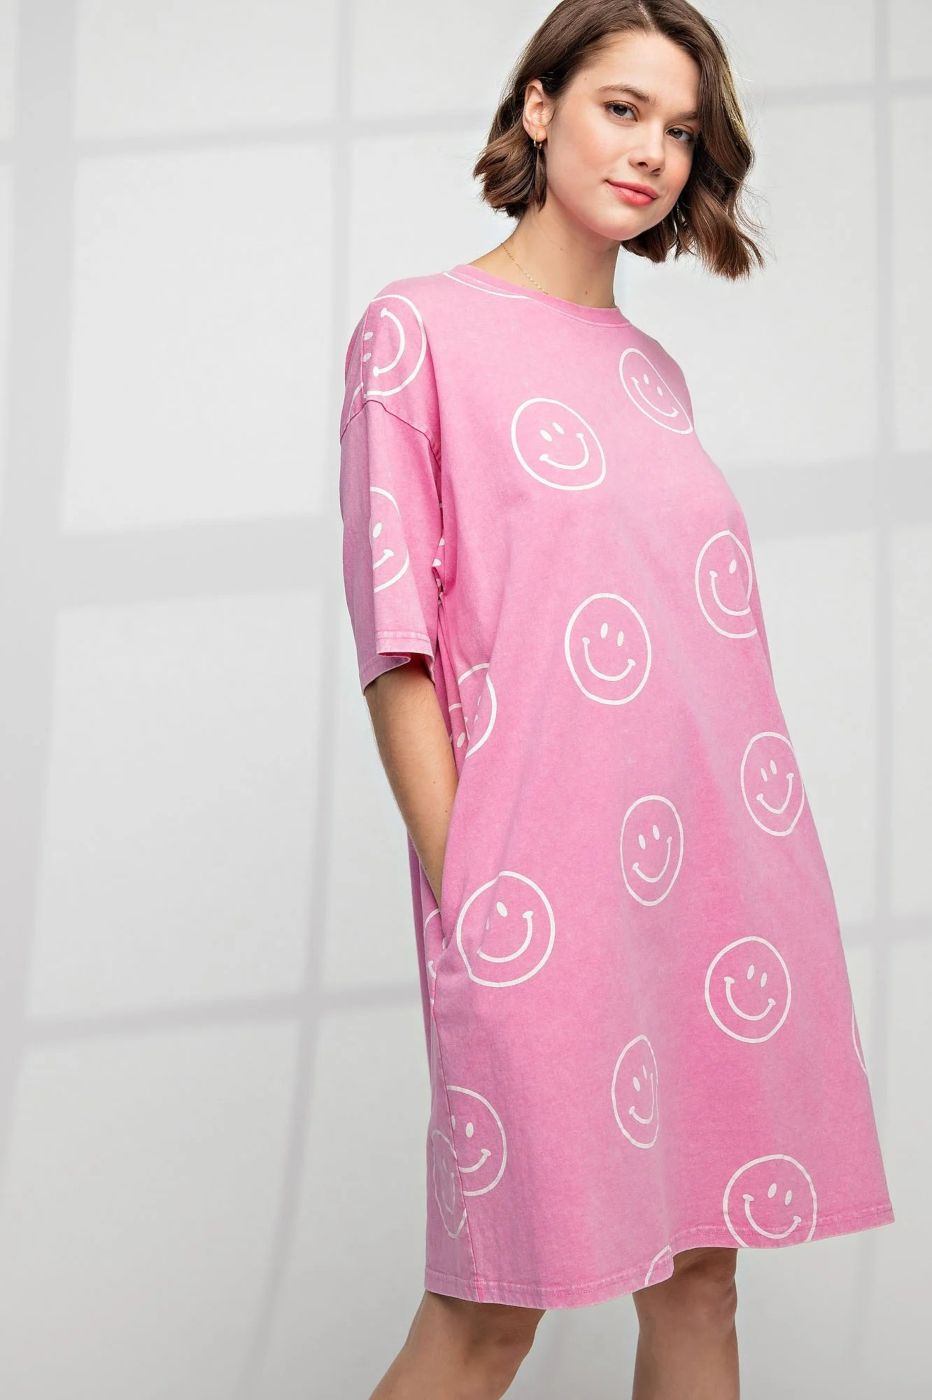 Woman wears pink short-sleeve dress with smiley faces